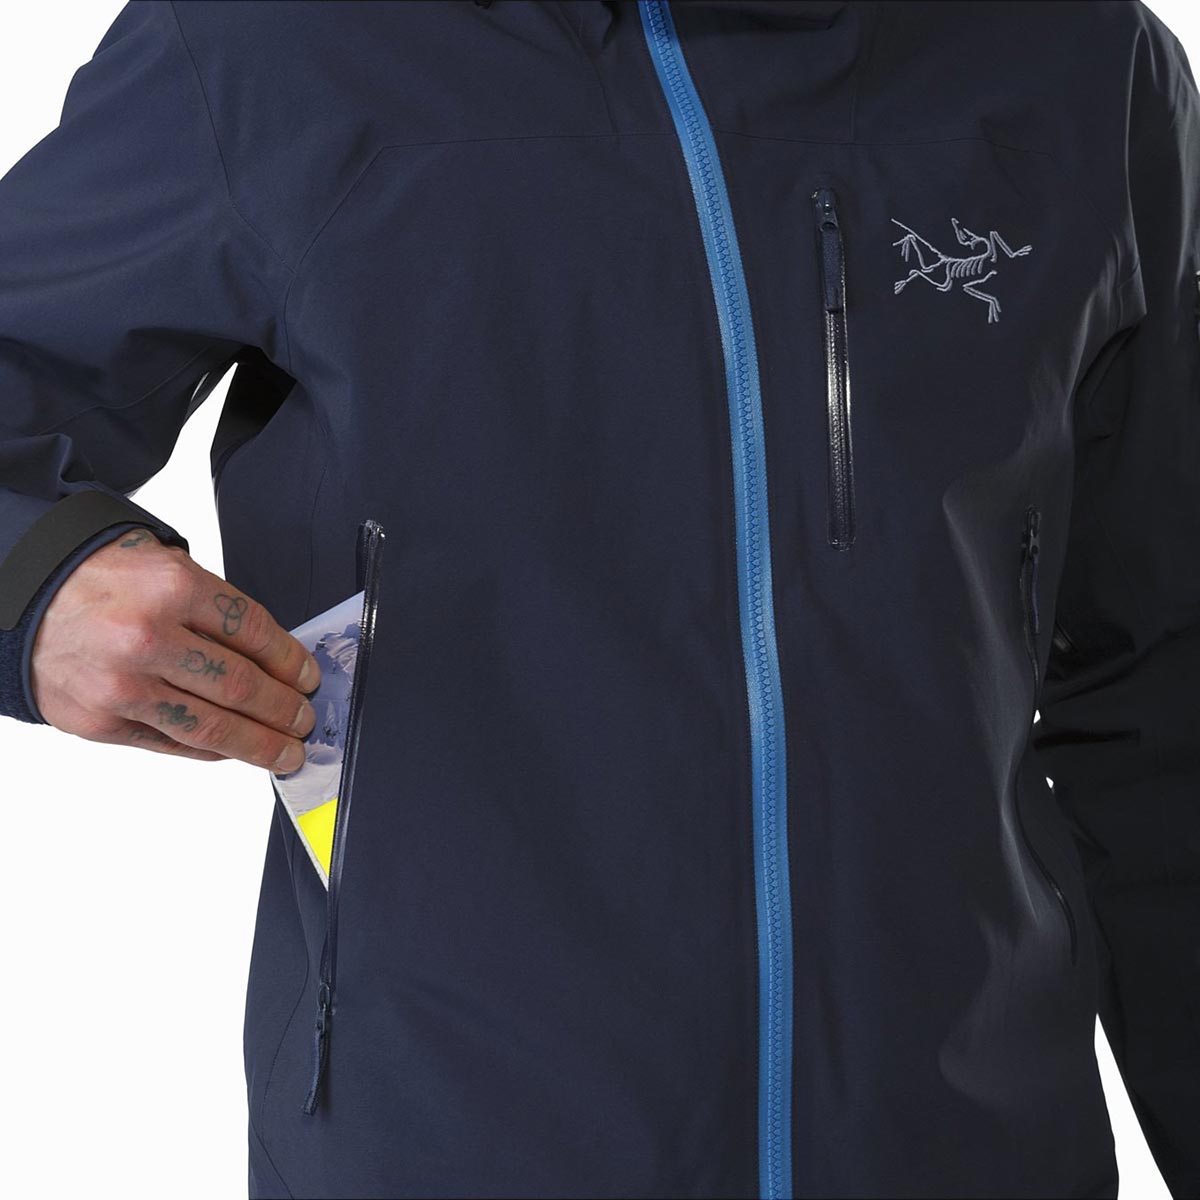 Arc'teryx Sidewinder Jacket, men's, discontinued Fall 2018 colors 